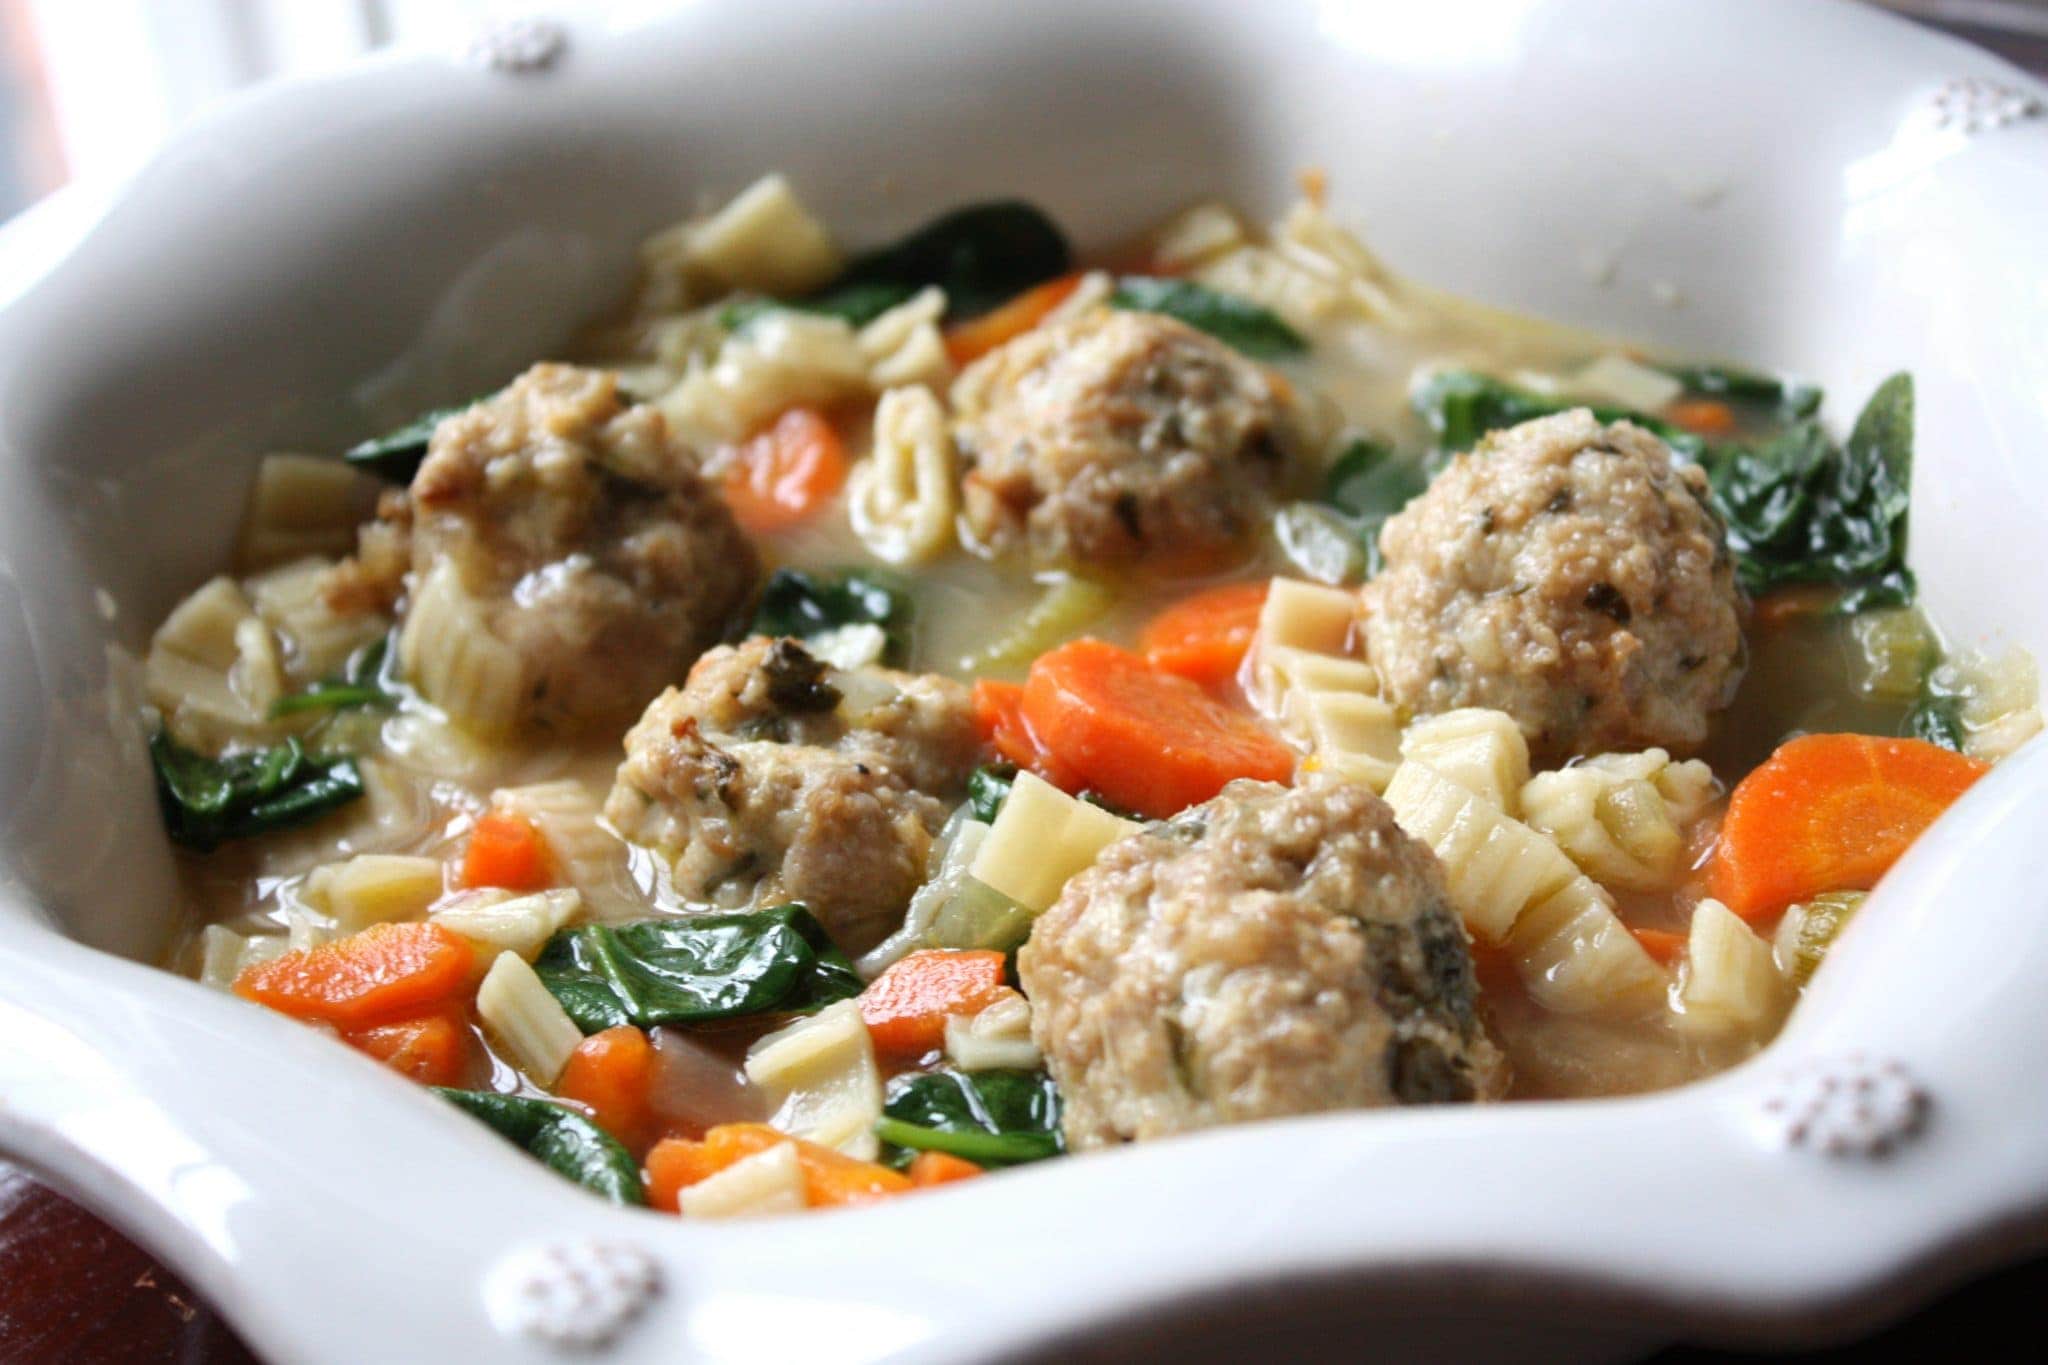 Ever wondered what's the Italian wedding soup history?